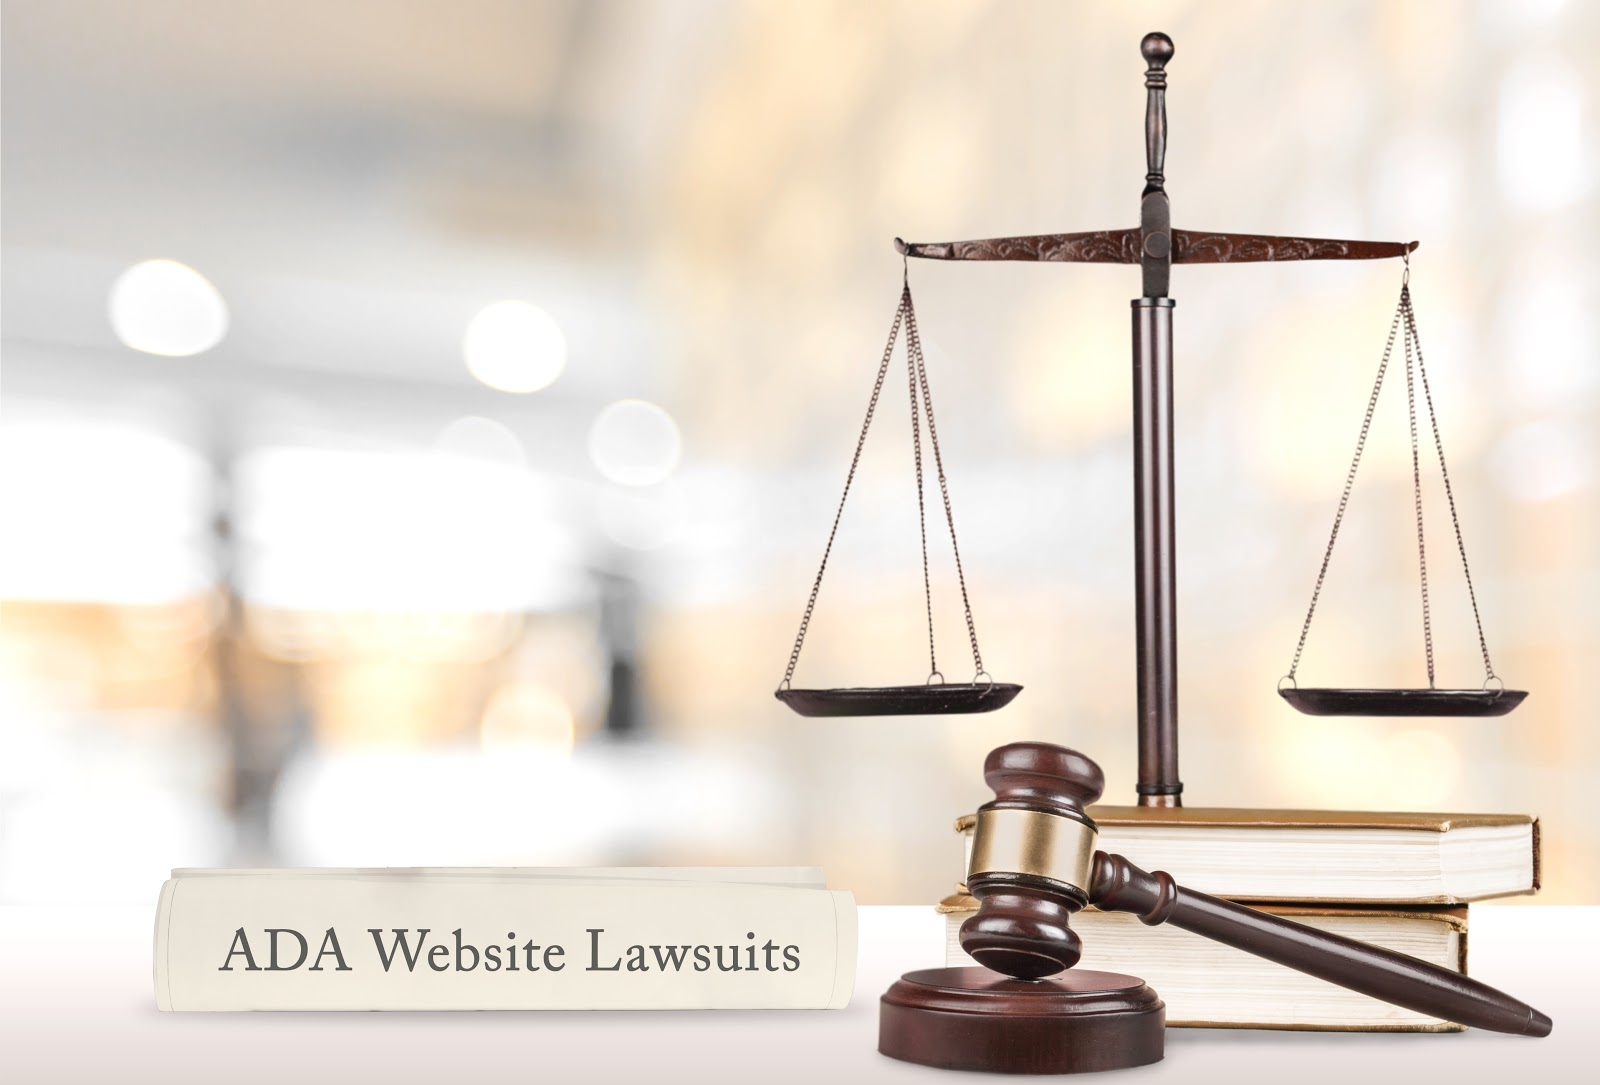 The ADA Lawsuits 